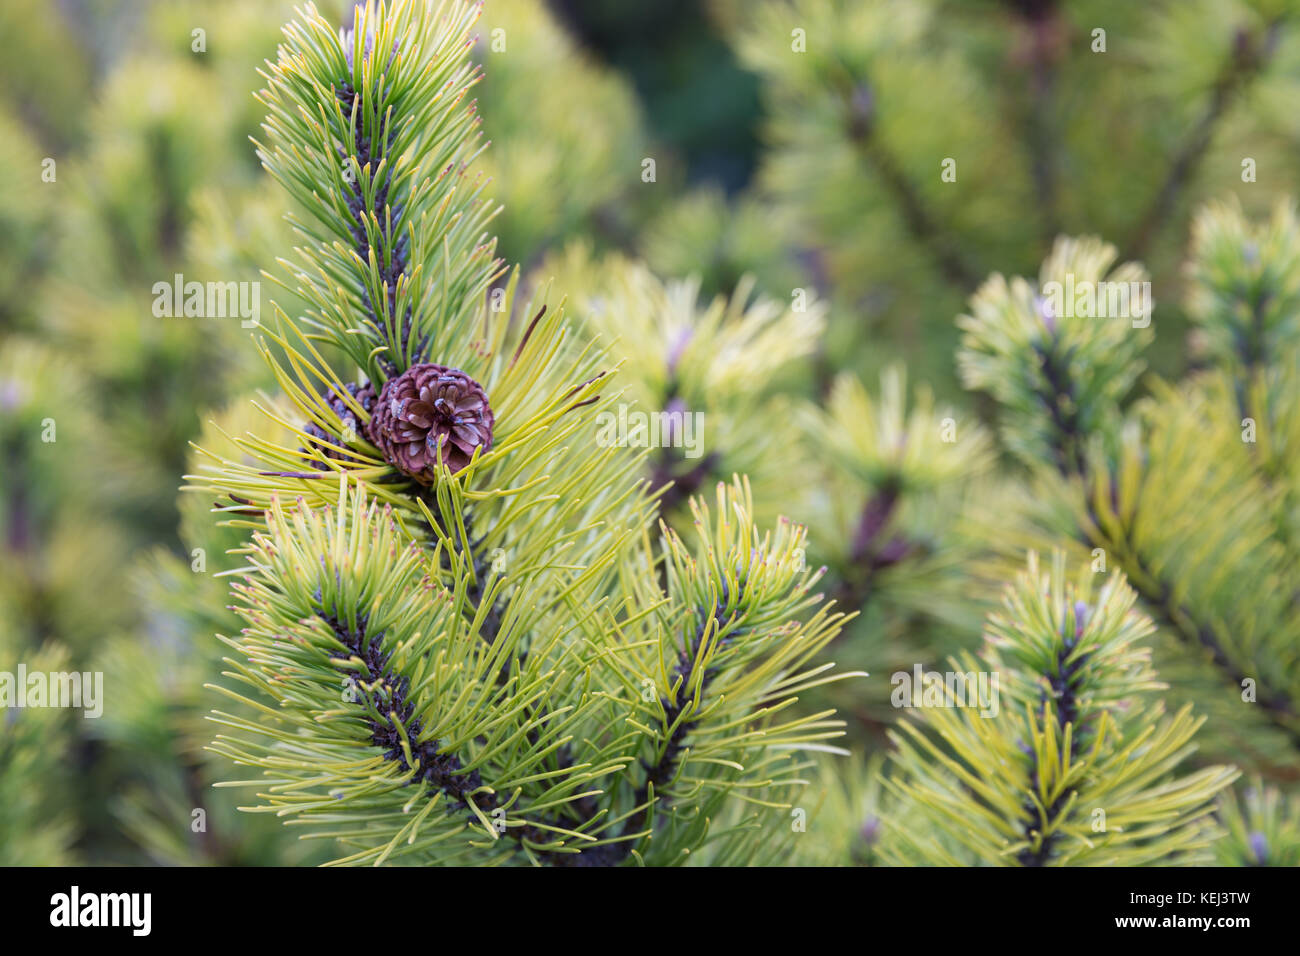 Background of fir tree with pine cone Stock Photo